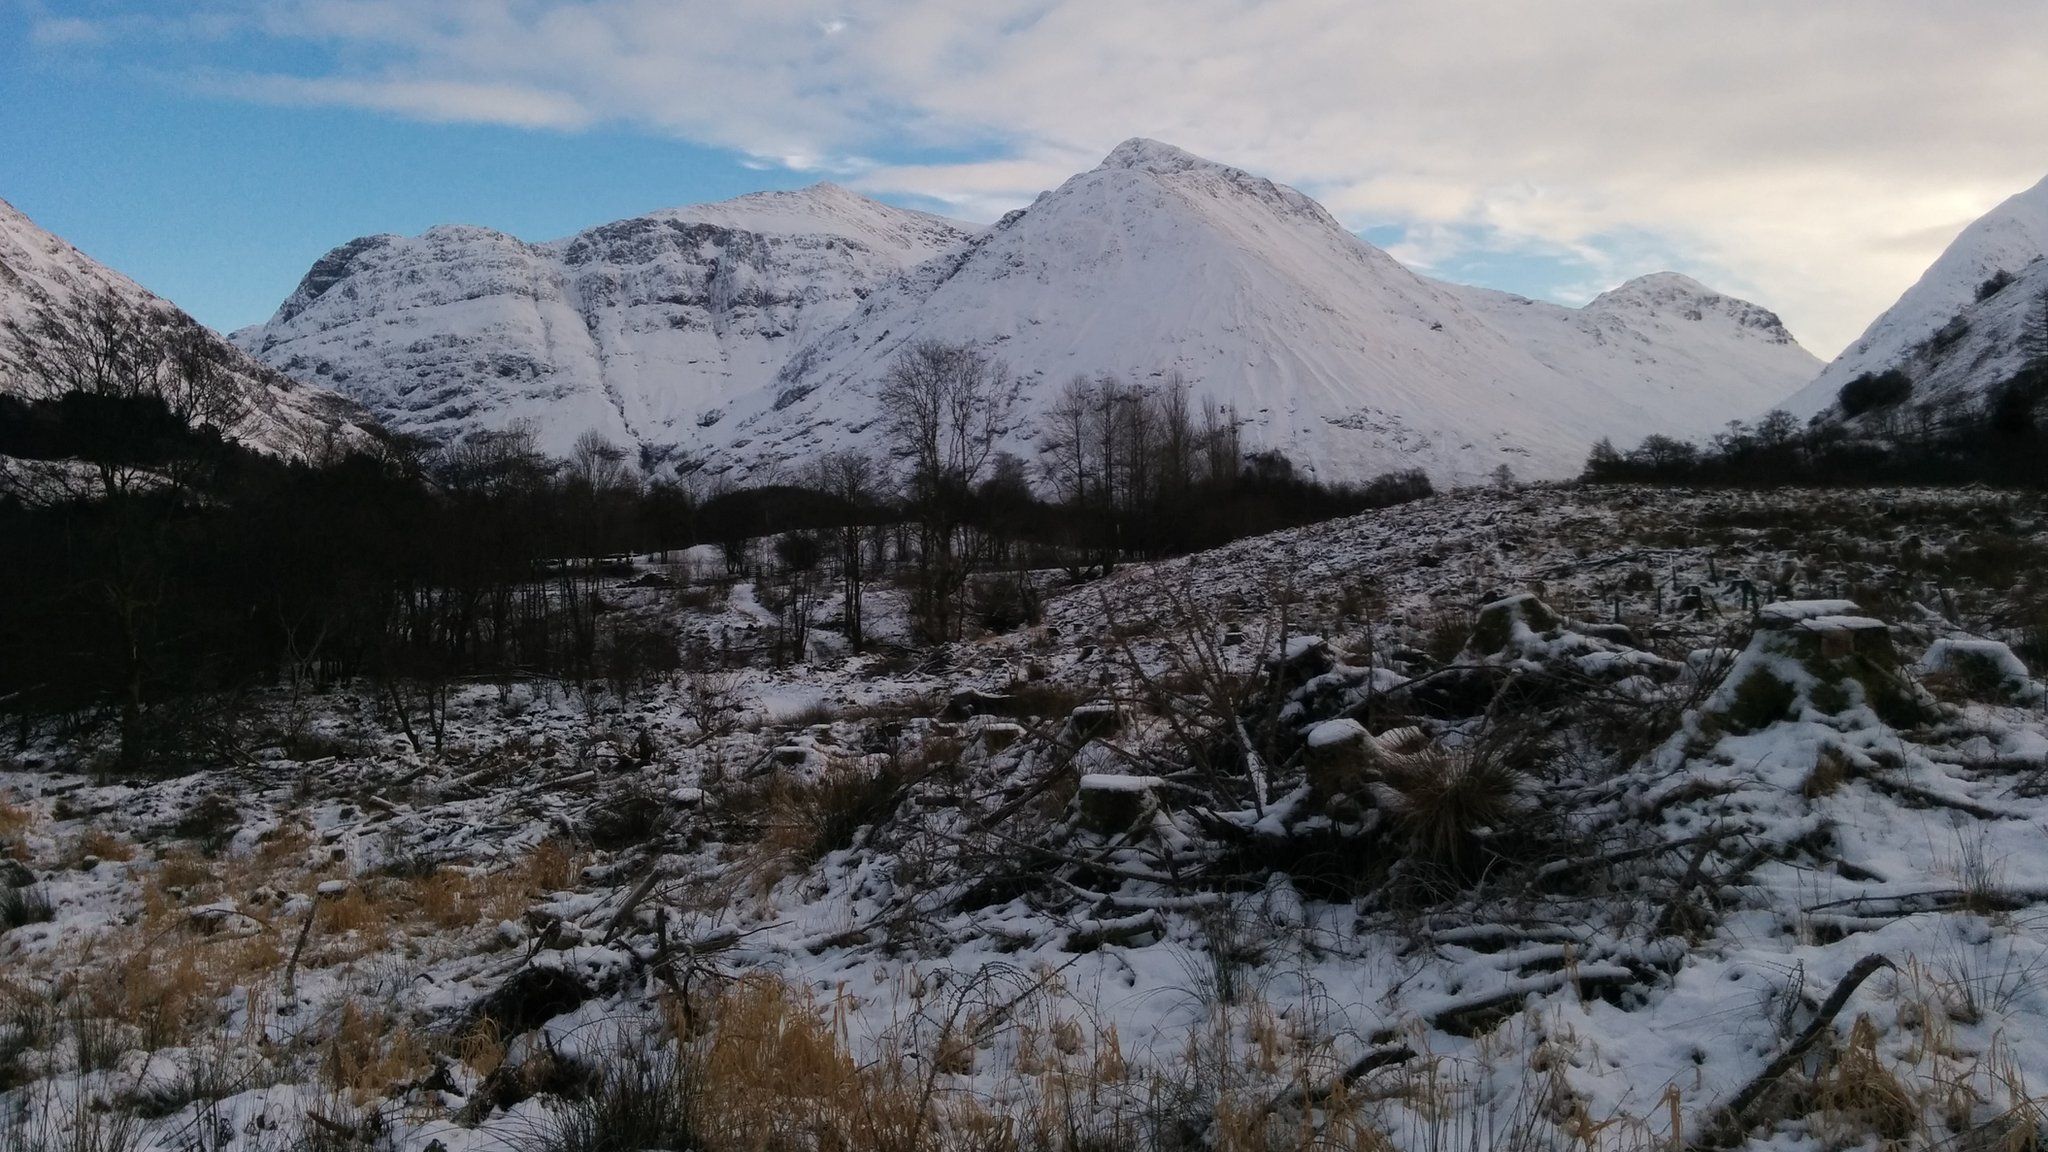 The site in Glen Coe where the turf building was found